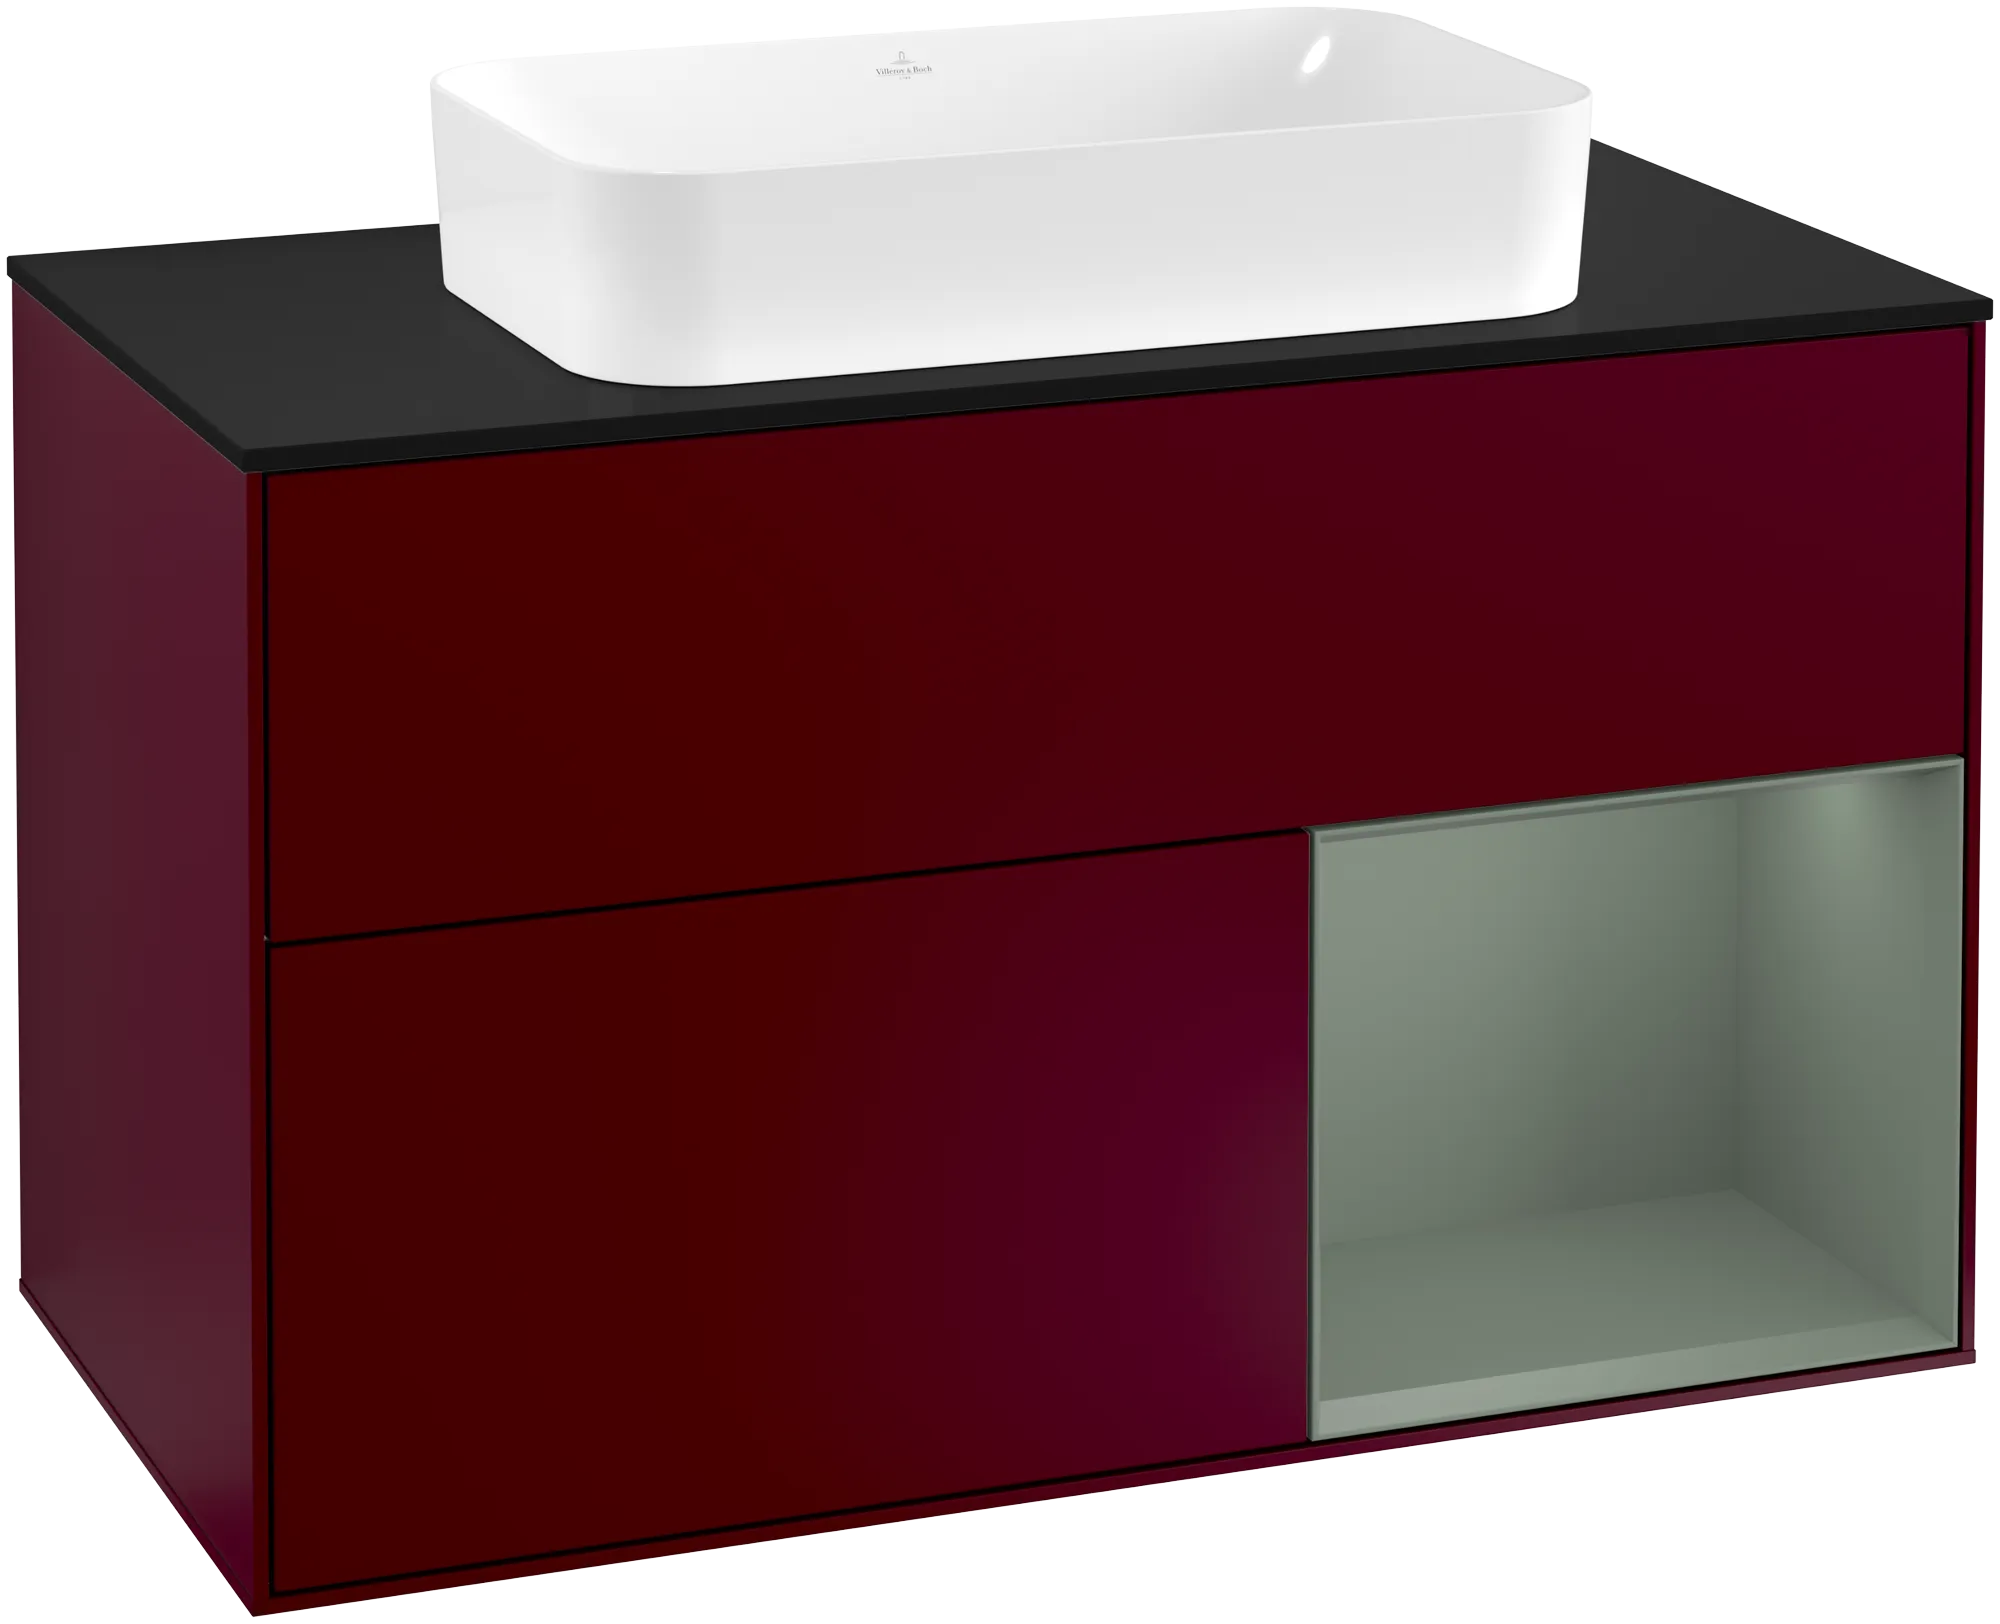 Picture of VILLEROY BOCH Finion Vanity unit, with lighting, 2 pull-out compartments, 1000 x 603 x 501 mm, Peony Matt Lacquer / Olive Matt Lacquer / Glass Black Matt #G252GMHB